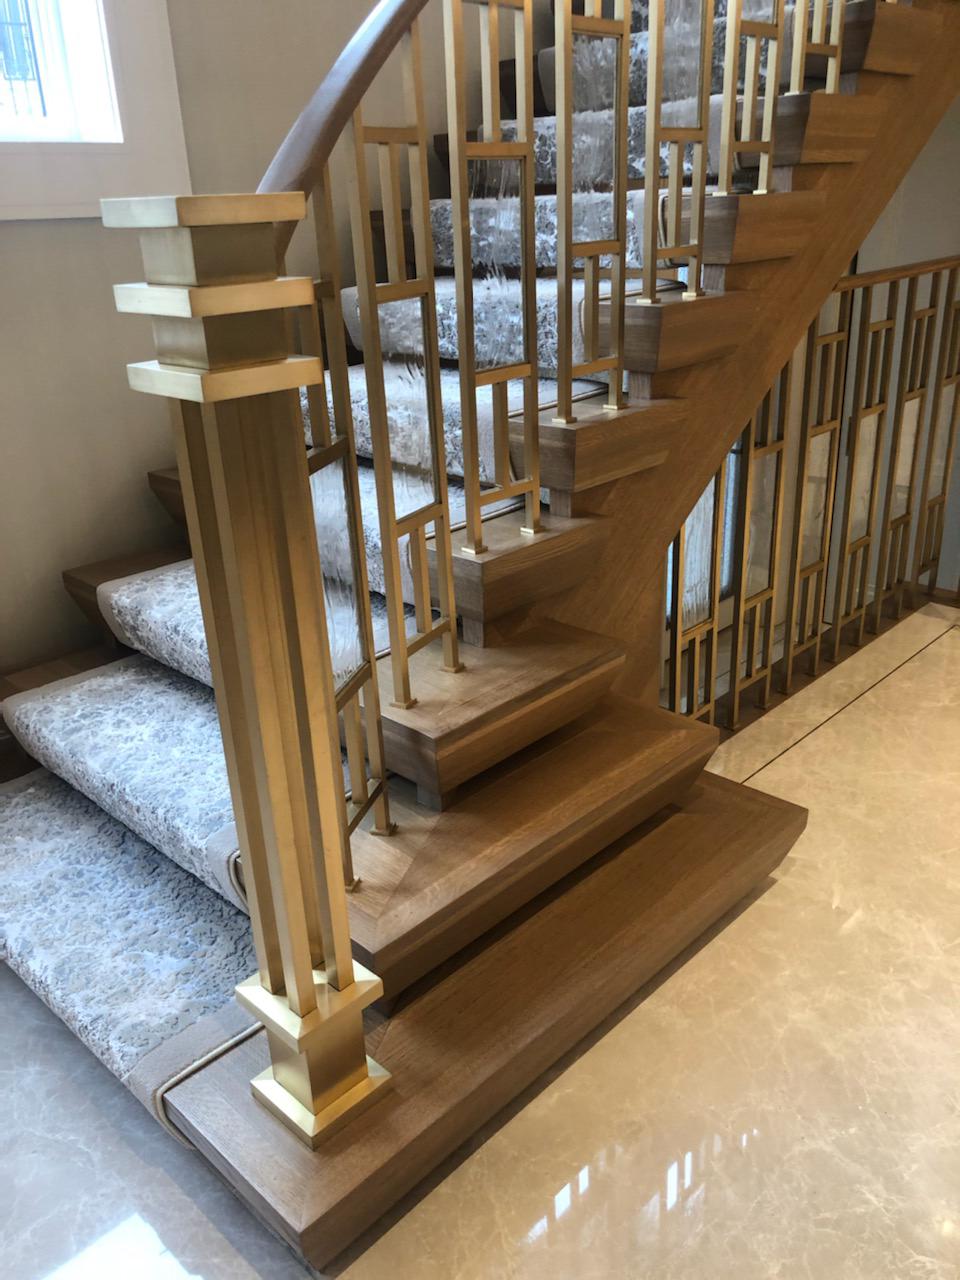 HMH Architectural Metal and Glass Brass modern railings